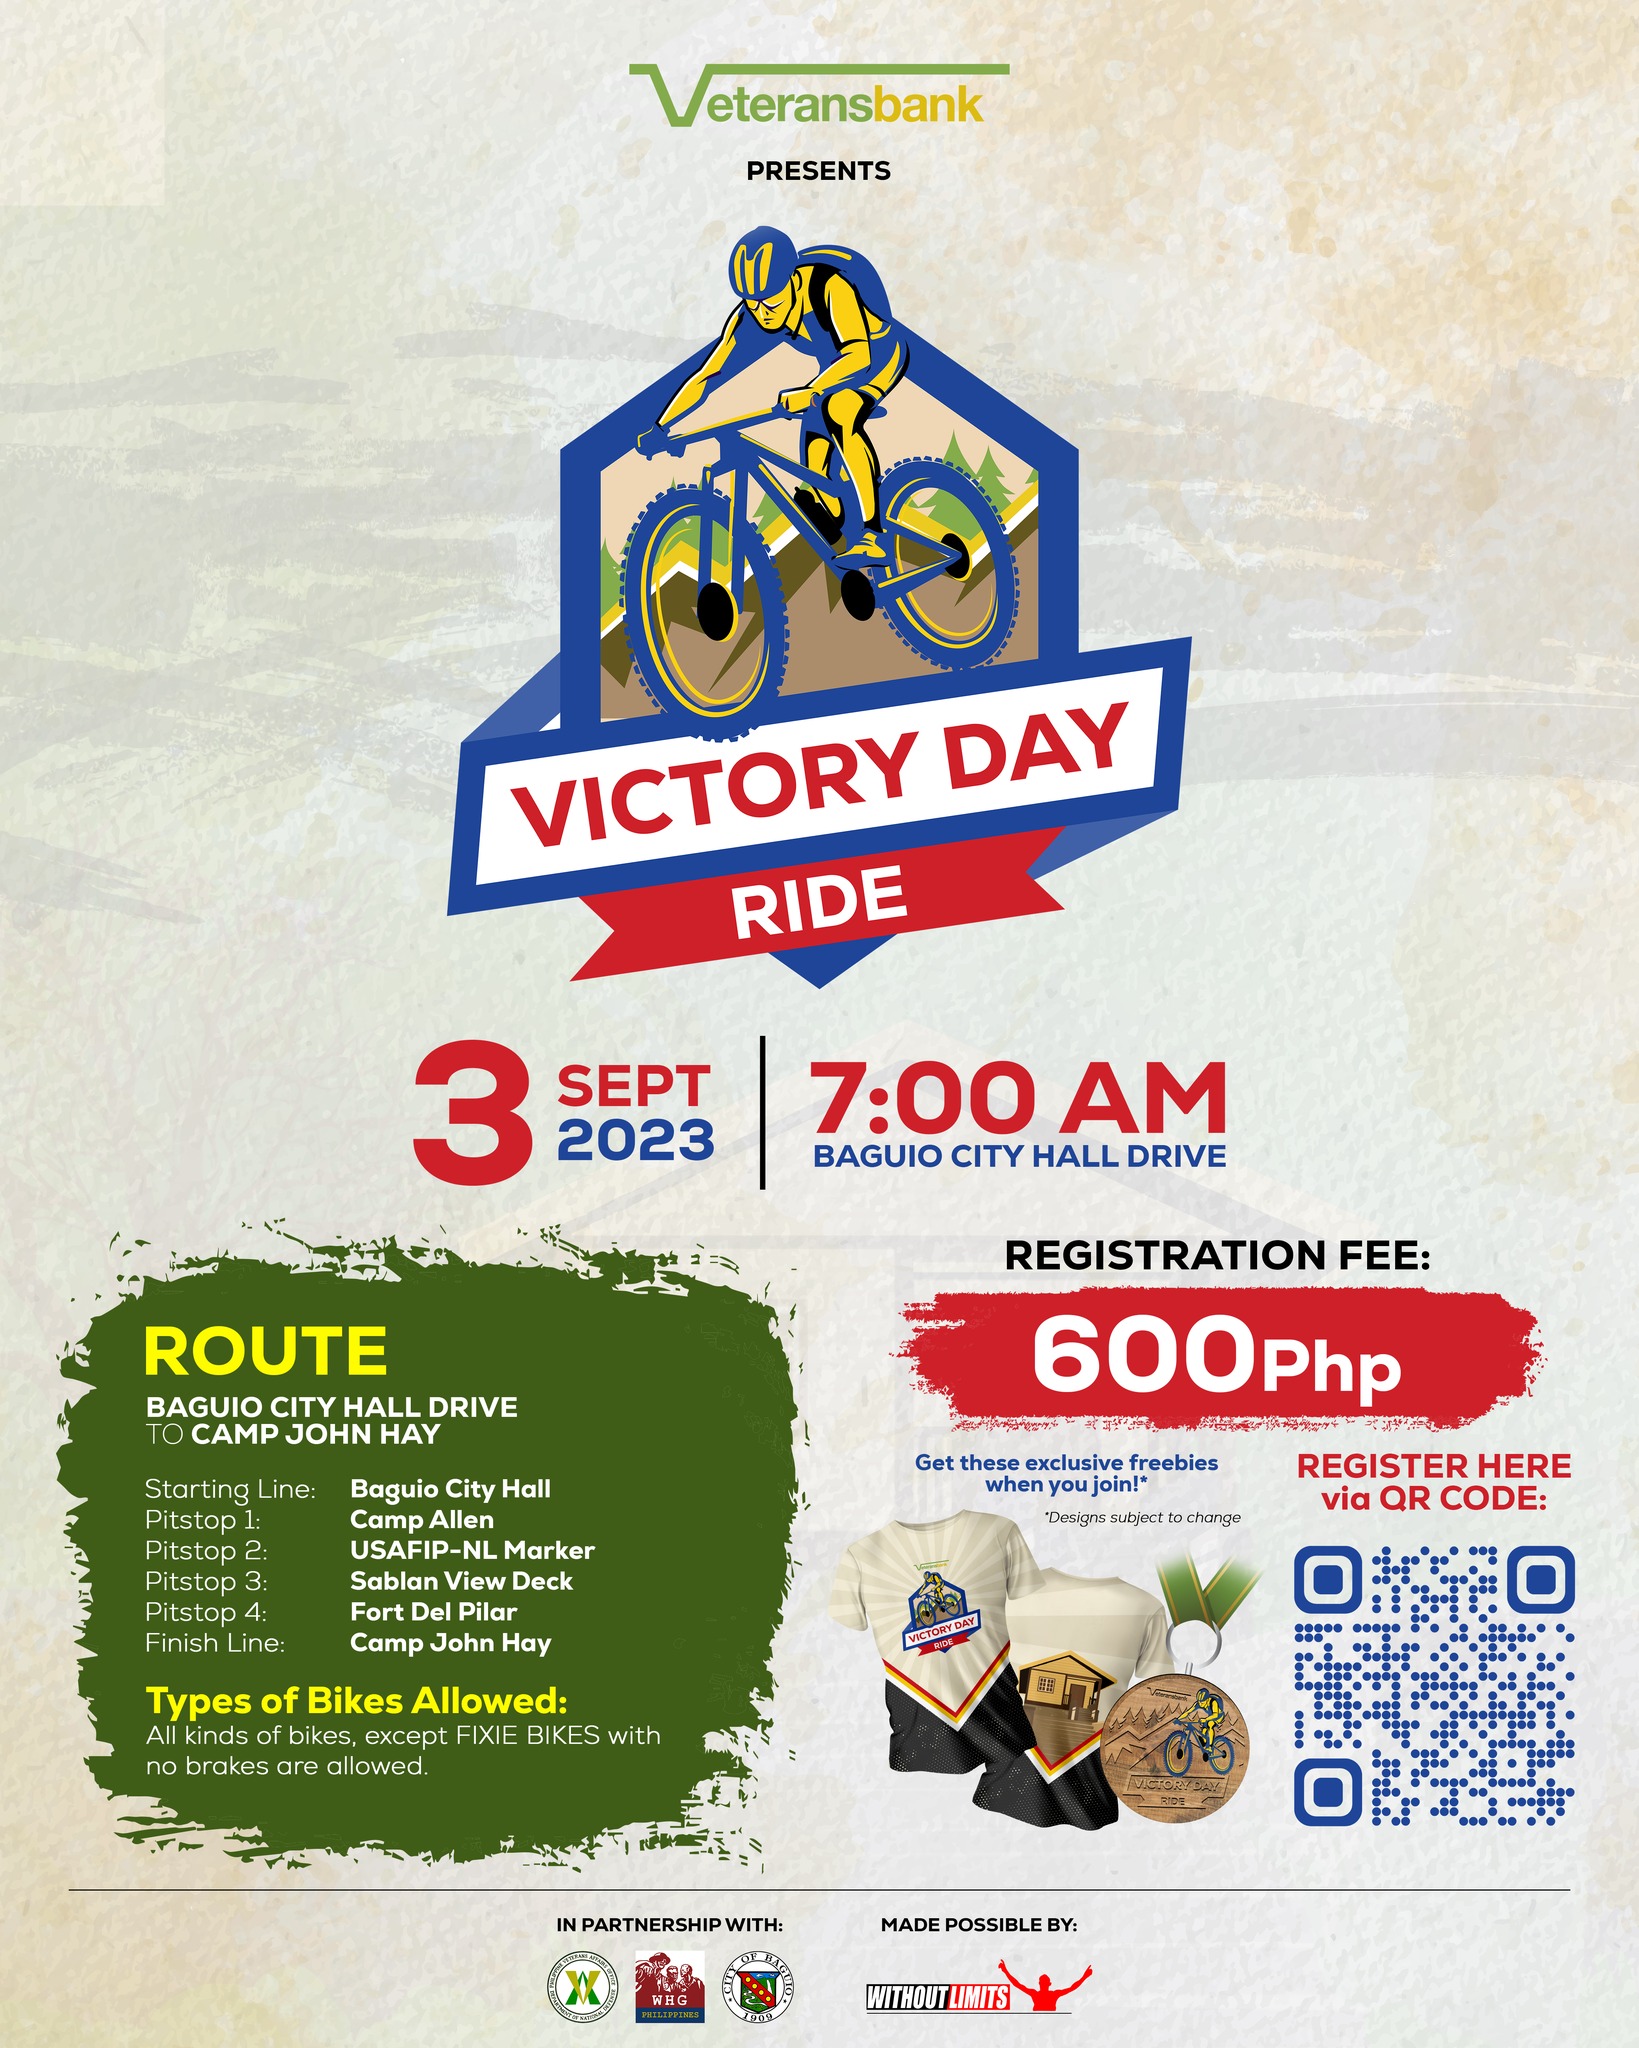 Philippine Veterans Bank Gears Up for the 1st Historic Victory Day Bike Ride in Baguio Honoring WWII Veterans